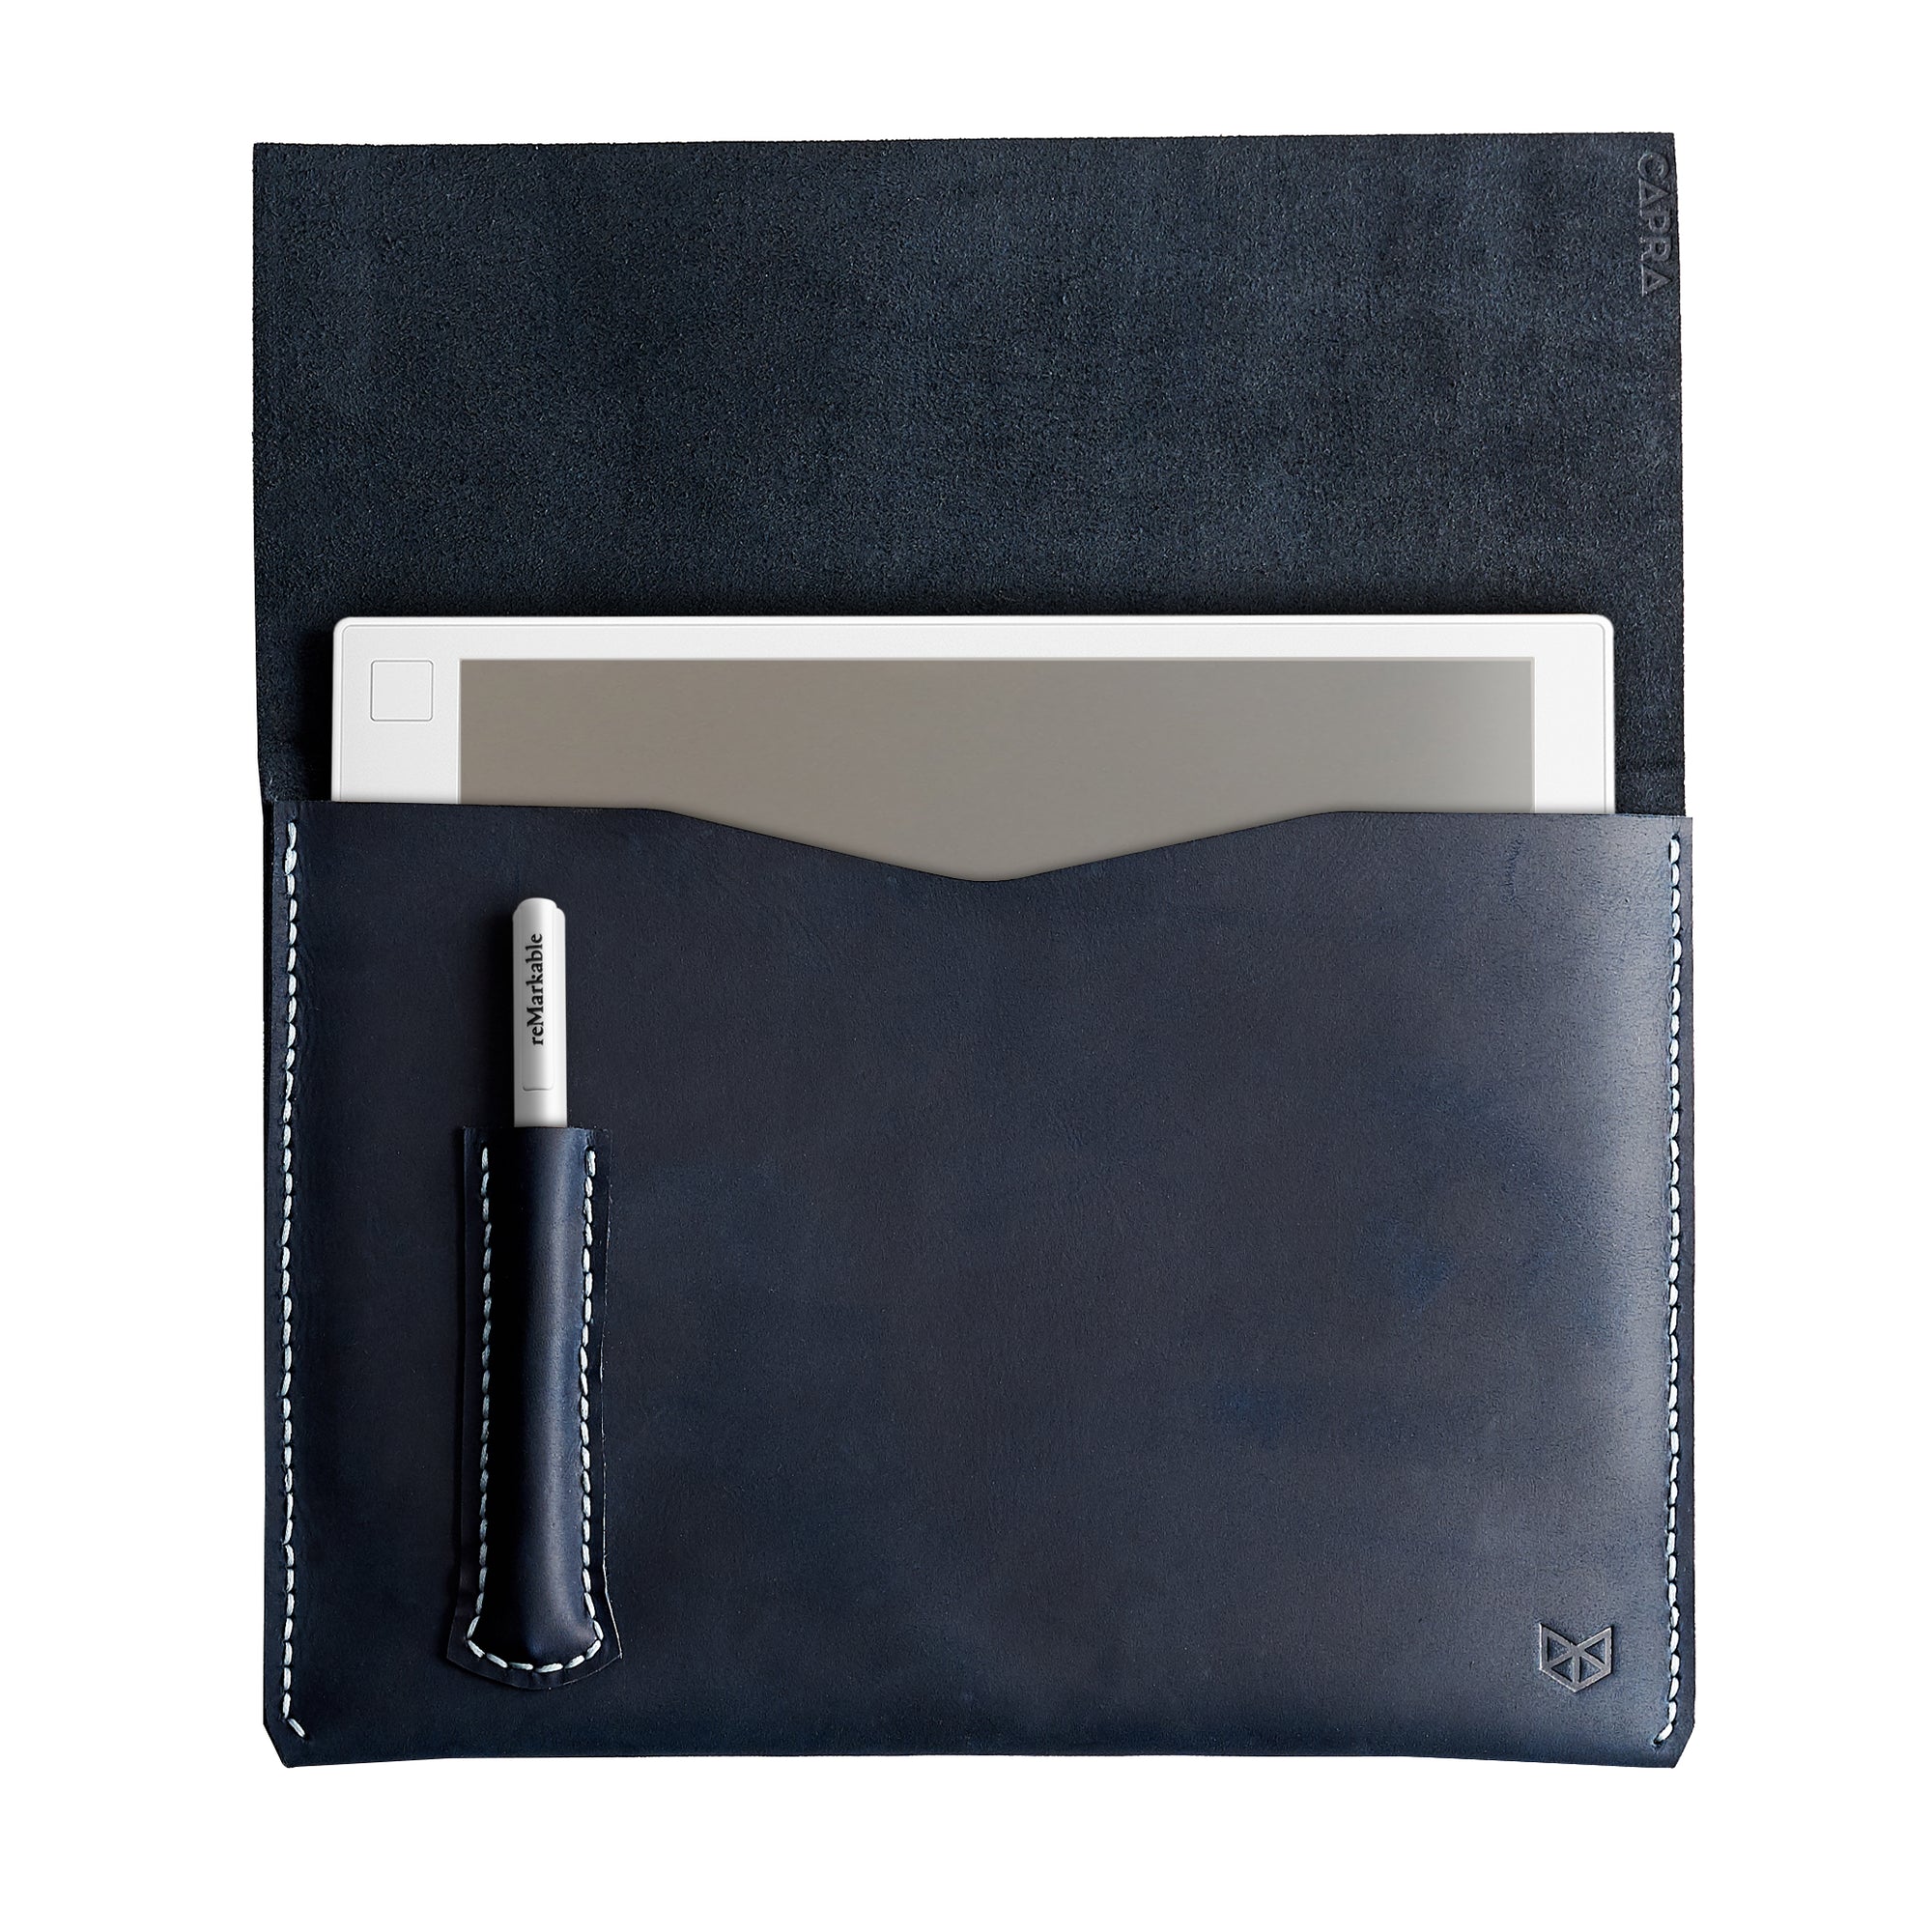 Cover. Blue handcrafted leather reMarkable tablet case. Folio with Marker holder. Paper E-ink tablet minimalist sleeve design. 